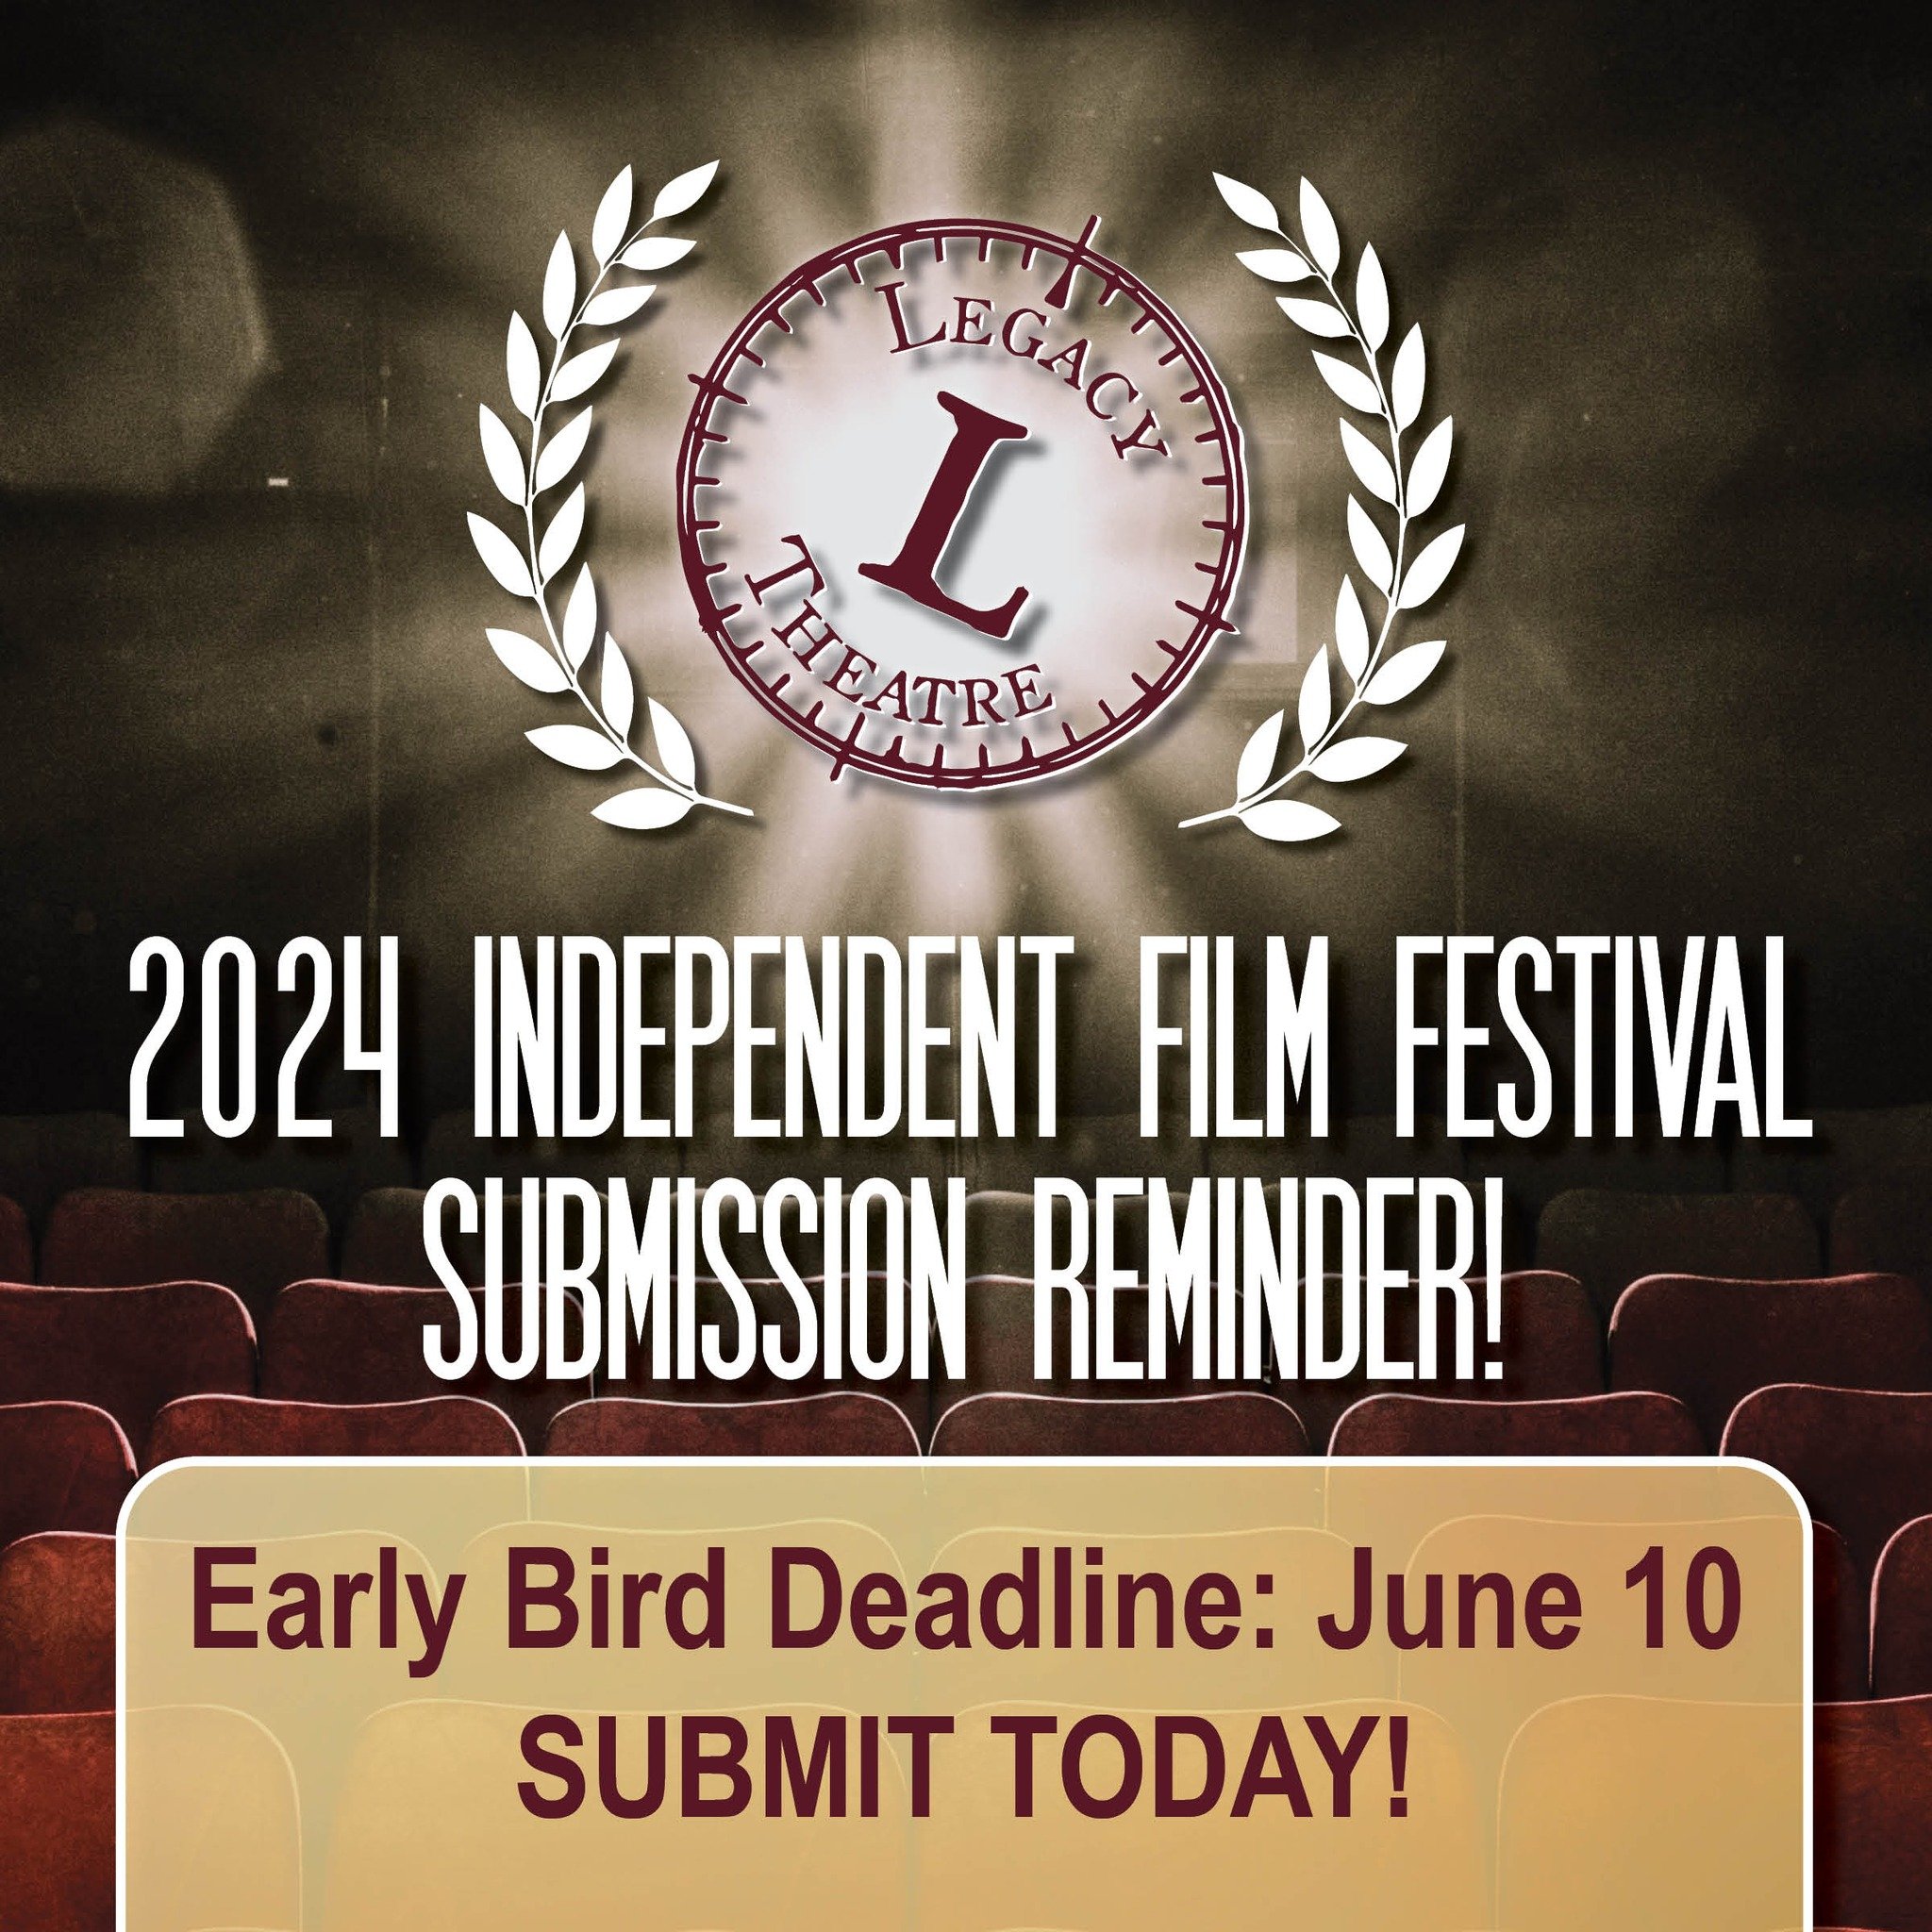 Calling all filmmakers! Don&rsquo;t forget to submit to the Legacy Theatre Independent Film Festival! The early bird deadline for submissions is June 10. 

https://filmfreeway.com/LegacyTheatreFilmFestival 

#legacytheatrect #legacytheatre #branfordc